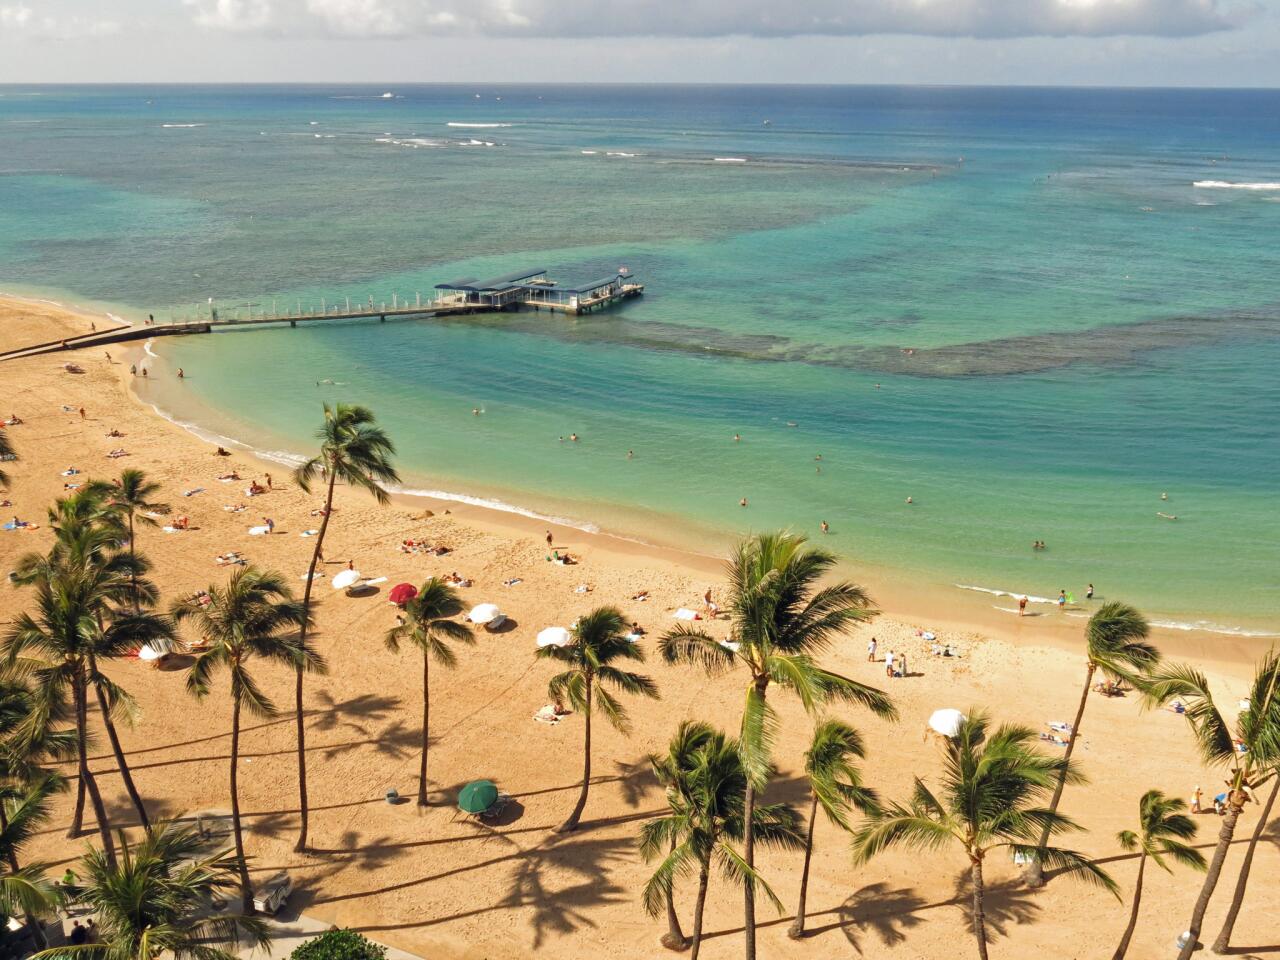 This beach on Oahu was ranked No. 1 by Dr. Beach. It's in Waikiki, which can be crowded and touristy, but this beach is quieter and good for families.